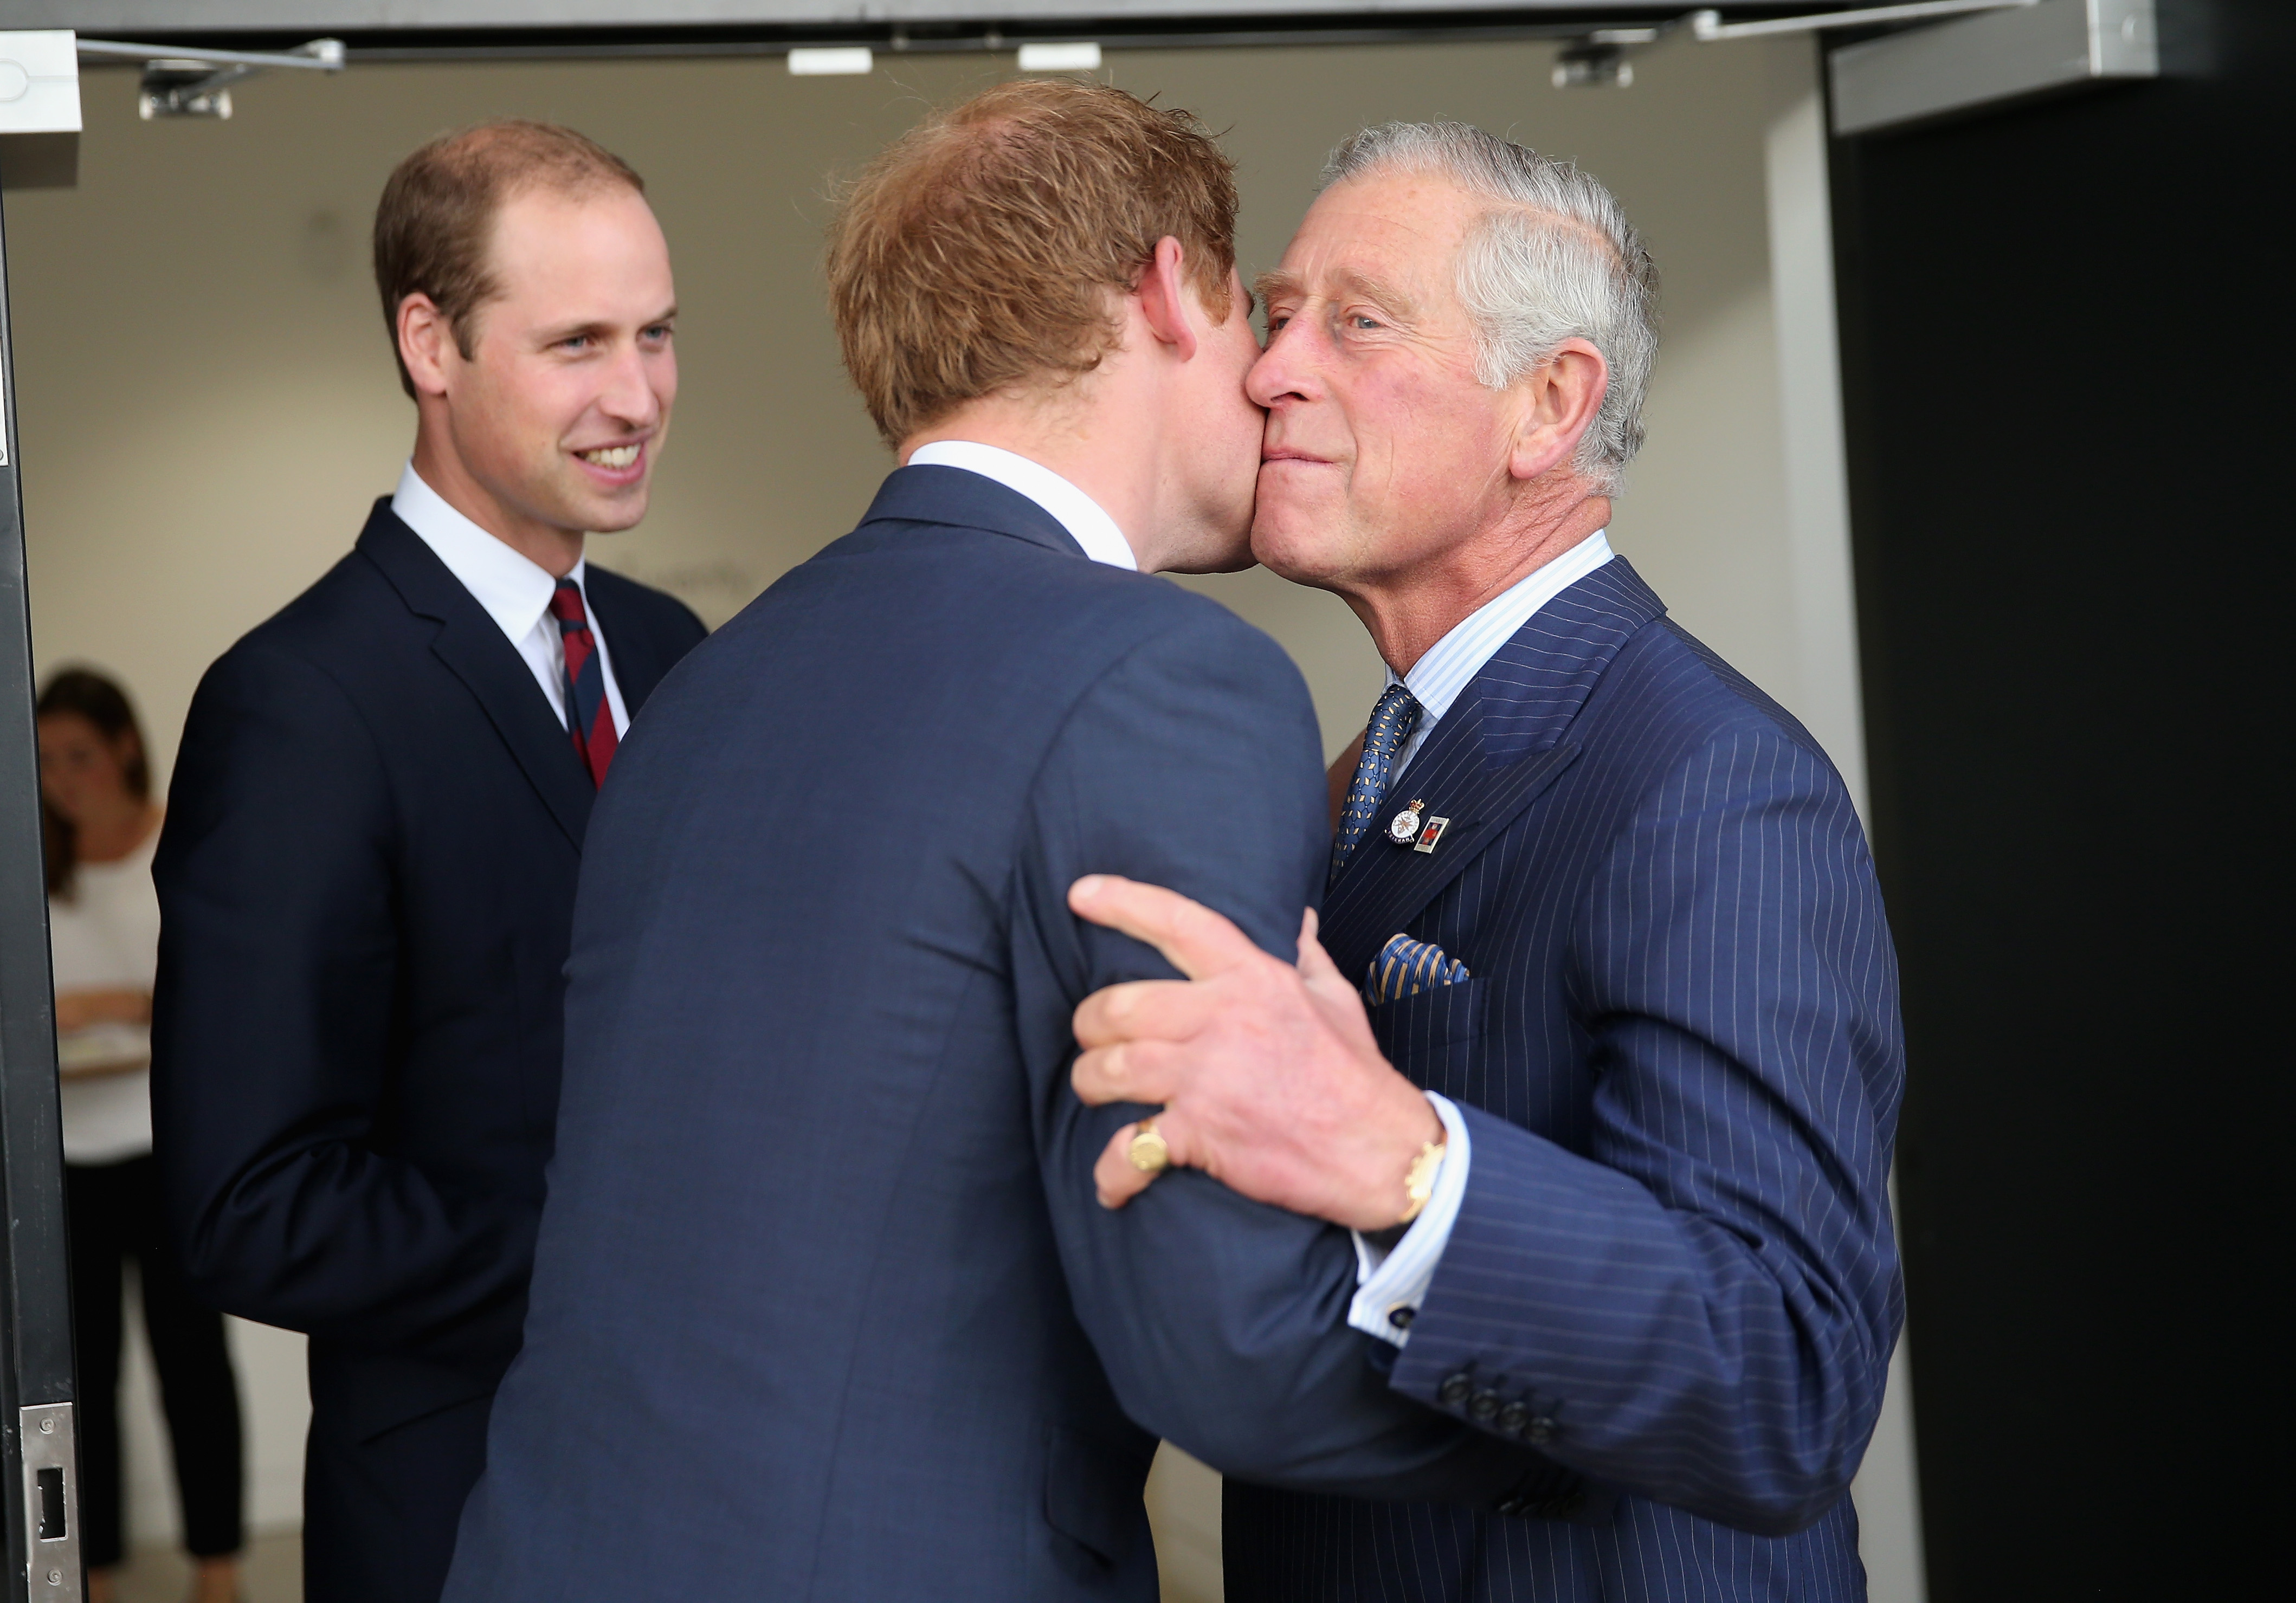 Prince Harry, Prince William, and King Charles III at the Invictus Games Opening Ceremony in 2014 | Source: Getty Images